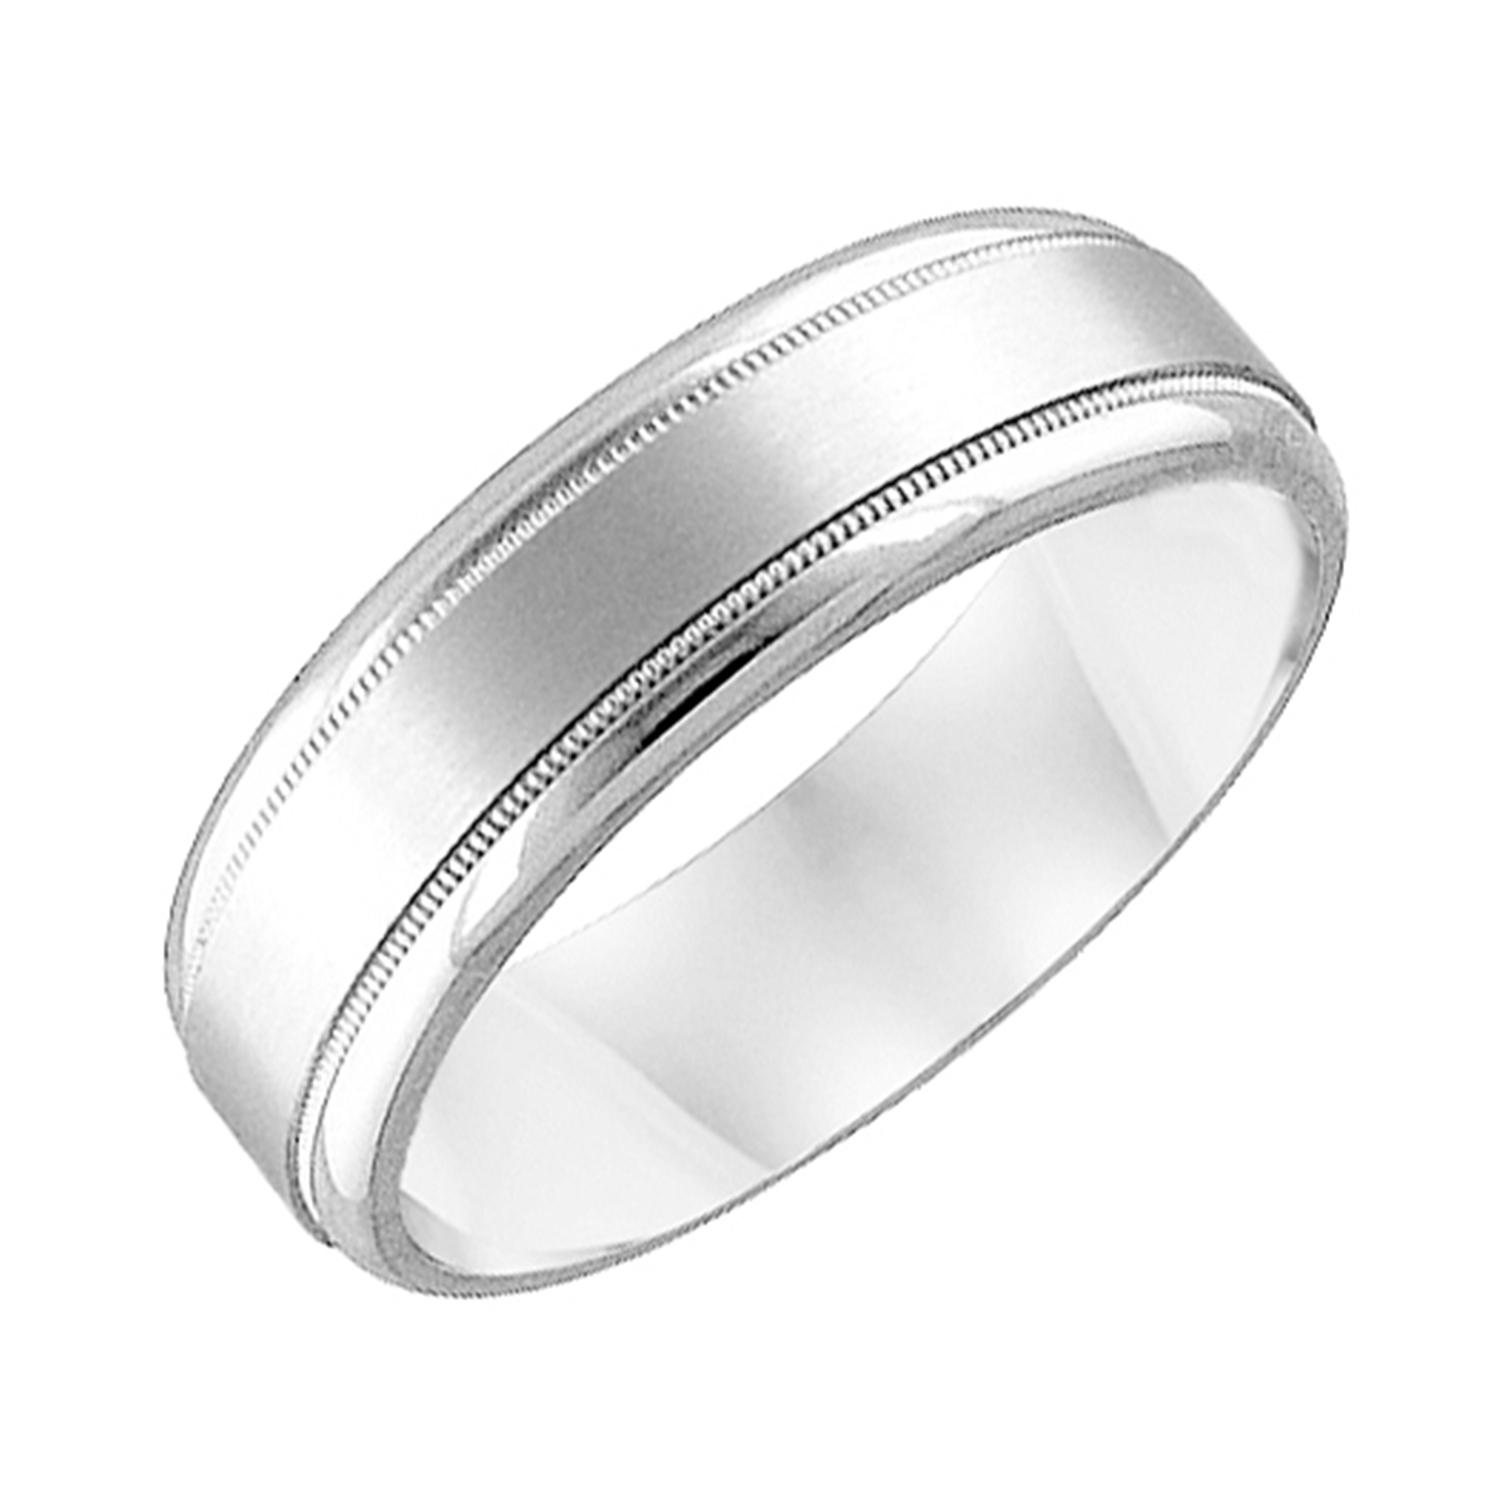 Gents Wedding Band with Rolled Edge